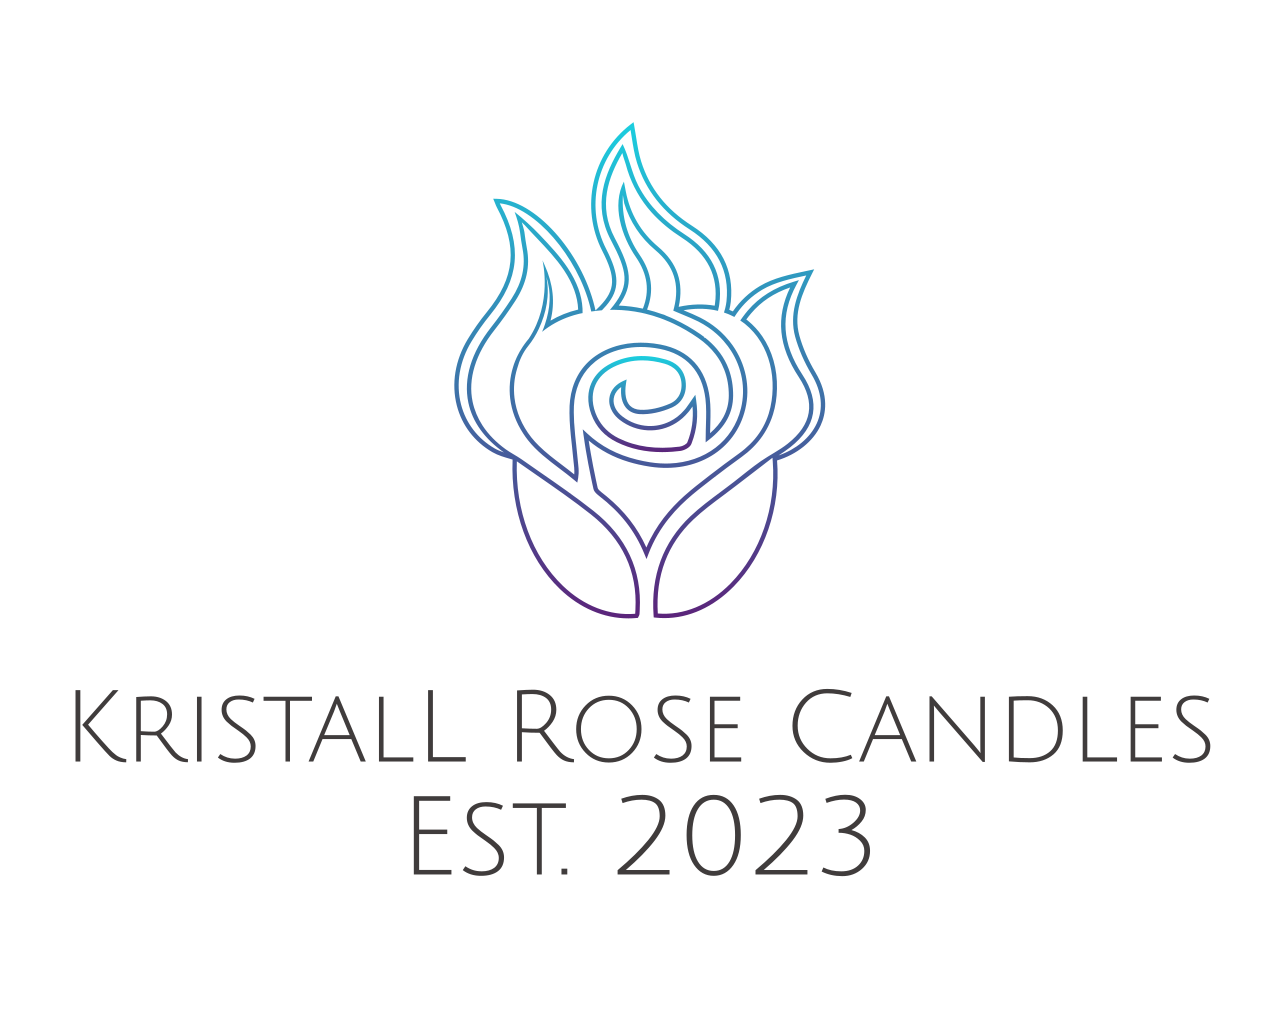 KristalL Rose Candles